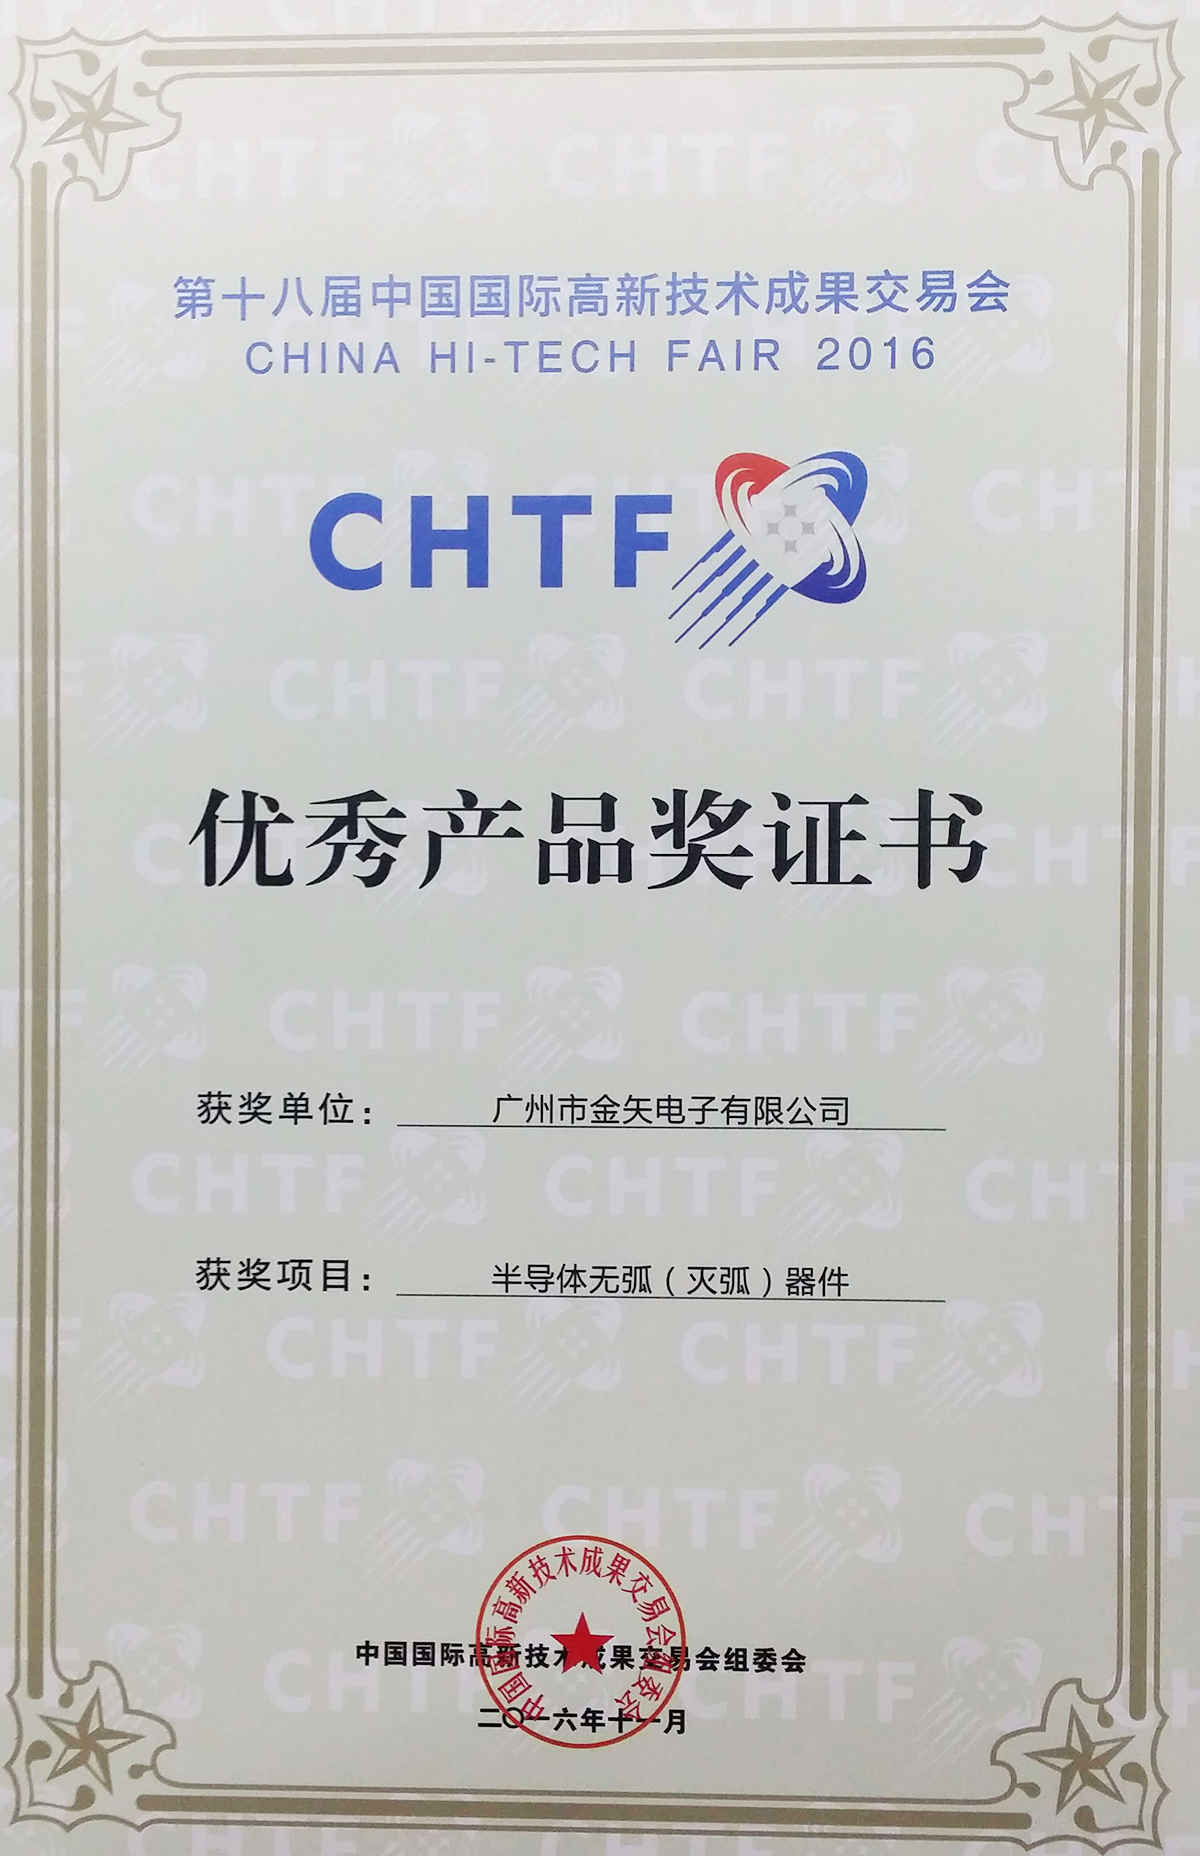 CHTF Certificate of Excellence